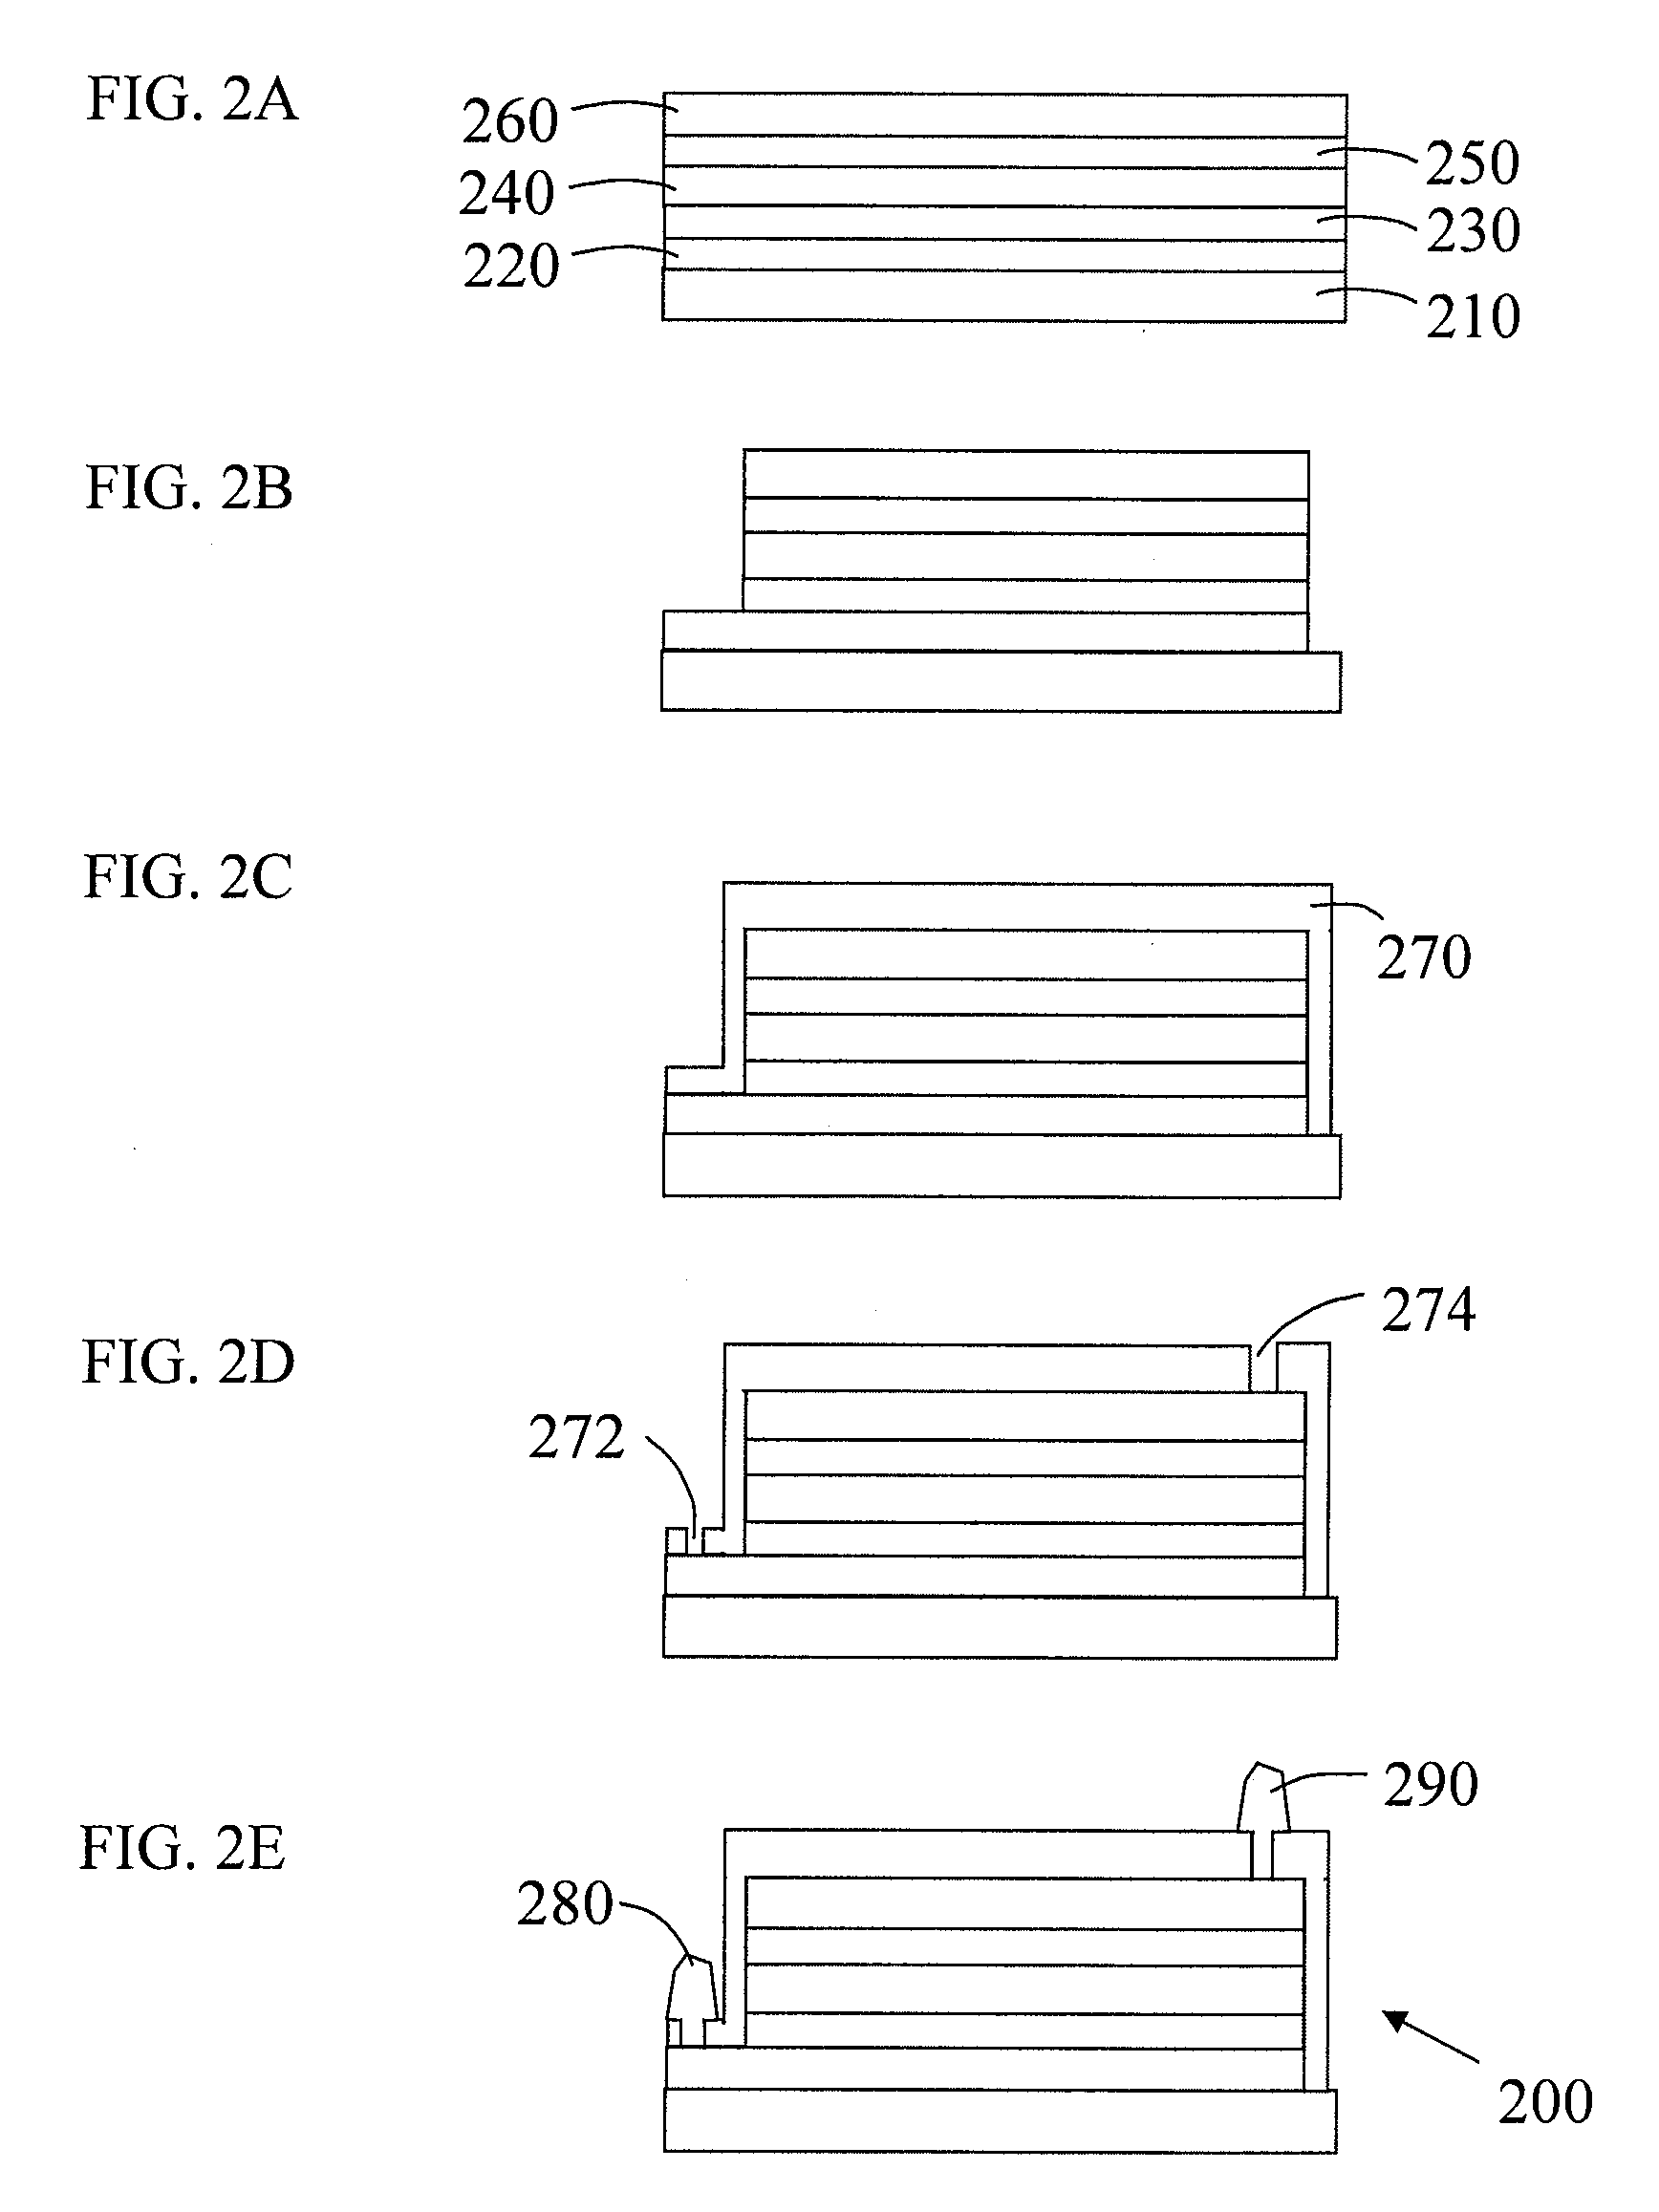 Method for manufacturing electrochromic devices